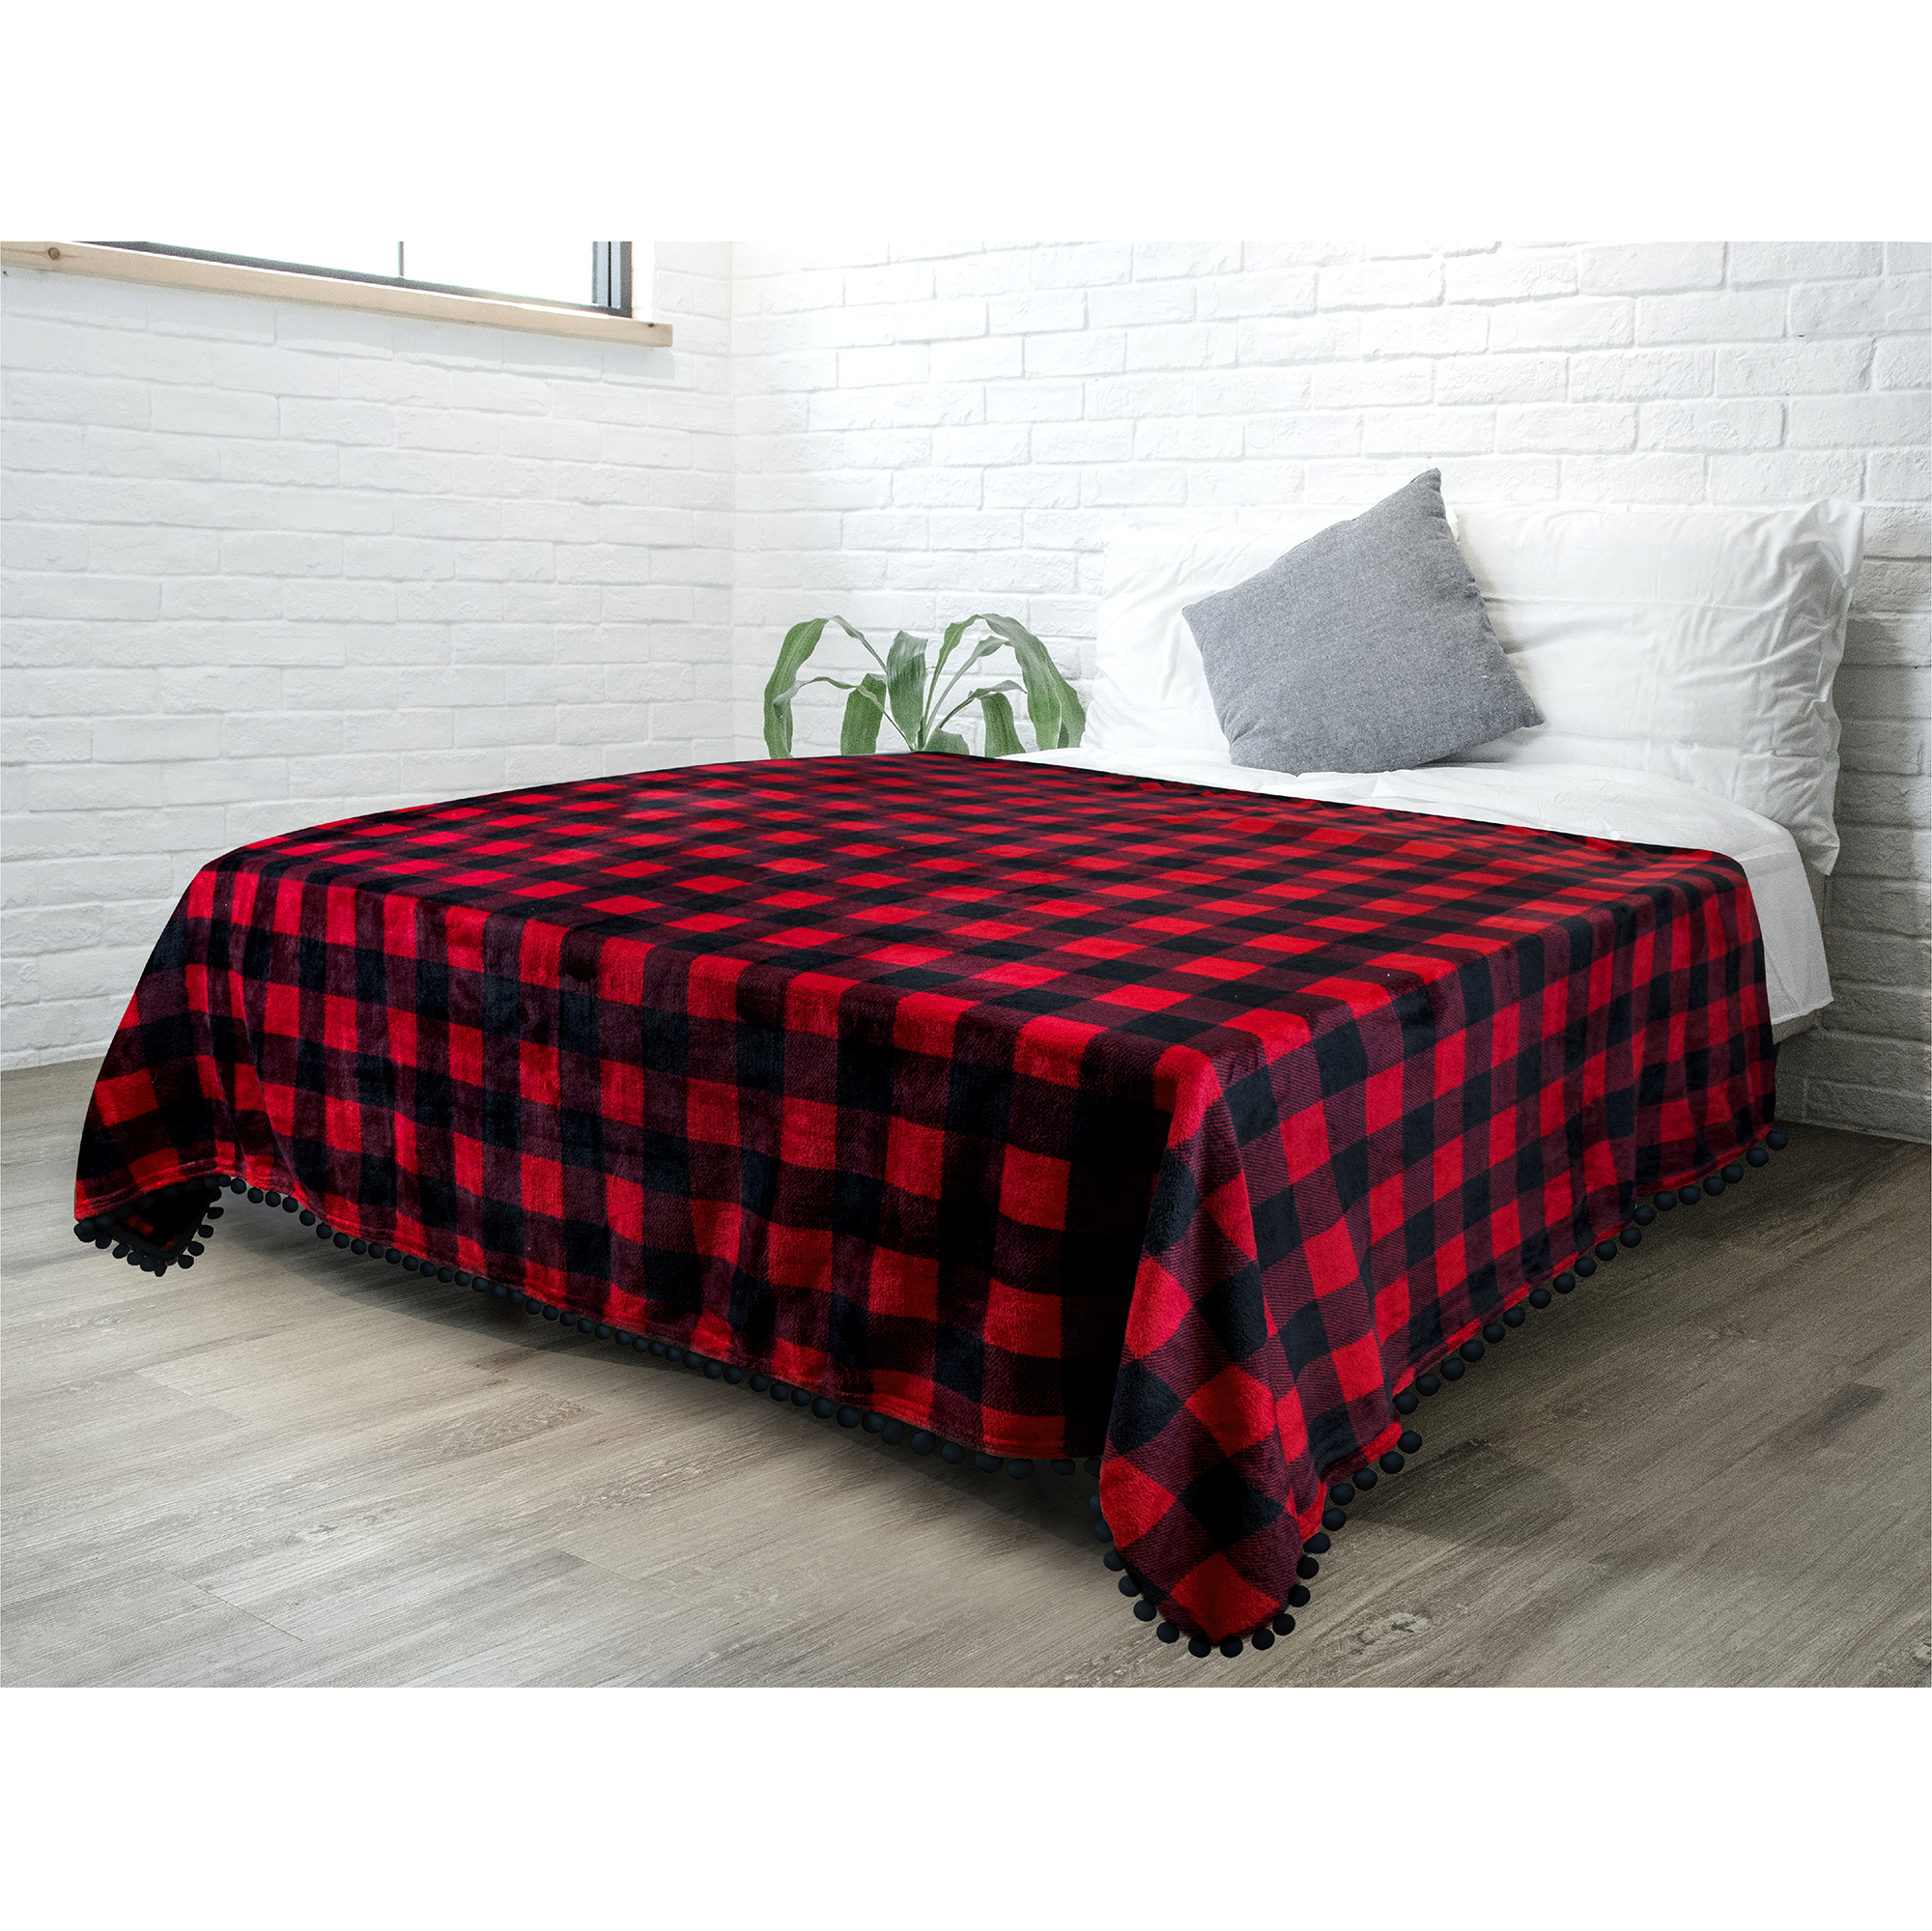 thumbnail 36 - Fleece Throw Blanket with Pom Pom Fringe Super Soft Lightweight Bed Couch Home